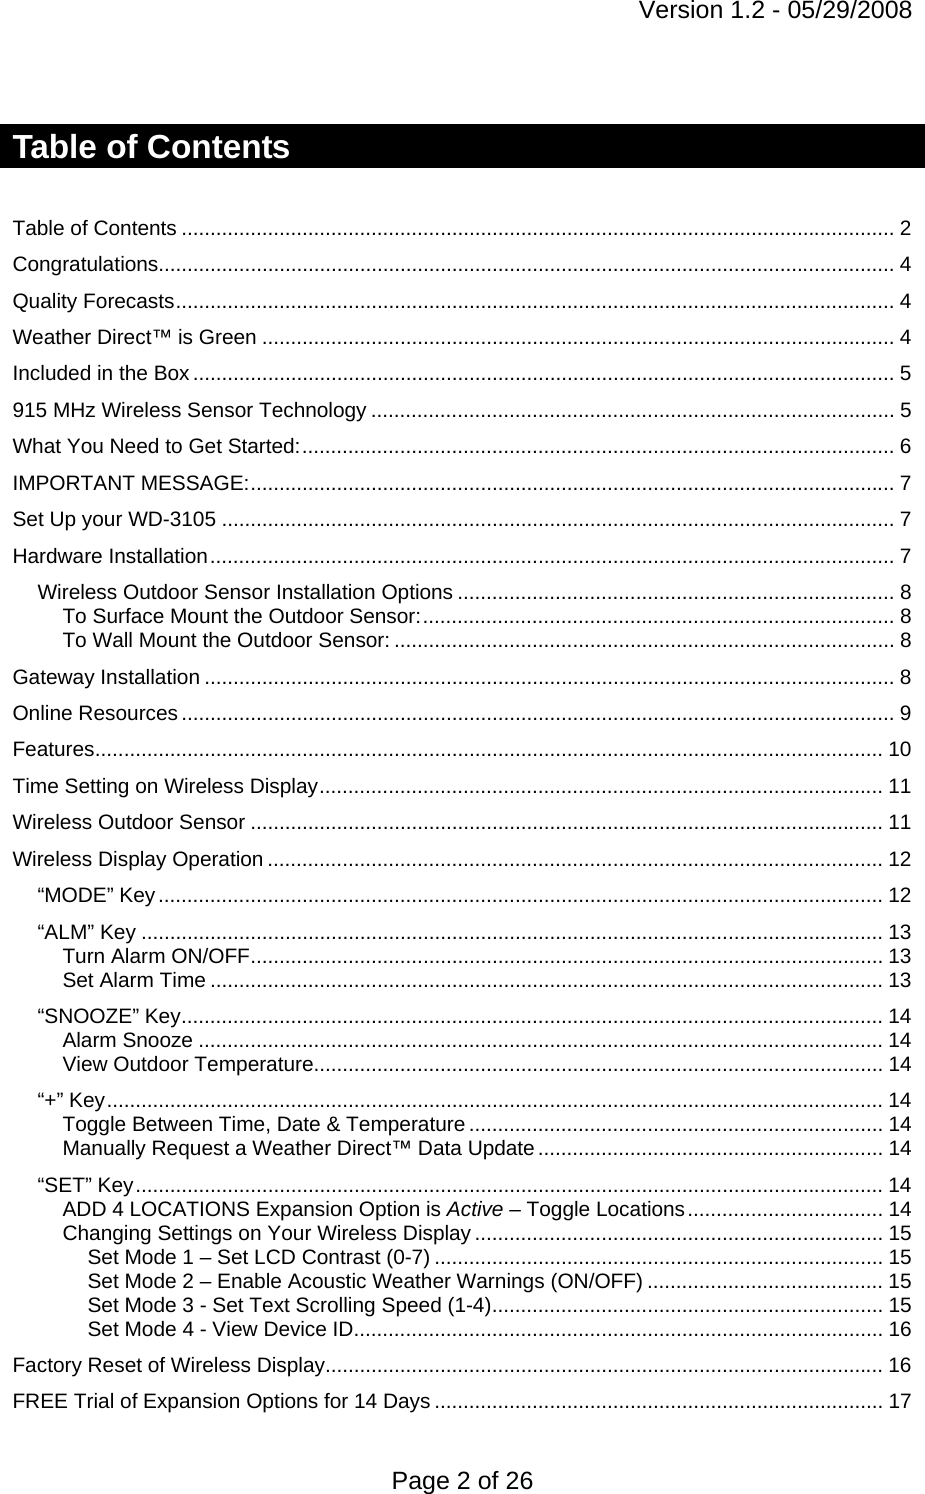 Version 1.2 - 05/29/2008 Page 2 of 26  Table of Contents   Table of Contents ............................................................................................................................ 2 Congratulations................................................................................................................................ 4 Quality Forecasts............................................................................................................................. 4 Weather Direct™ is Green .............................................................................................................. 4 Included in the Box .......................................................................................................................... 5 915 MHz Wireless Sensor Technology ........................................................................................... 5 What You Need to Get Started:....................................................................................................... 6 IMPORTANT MESSAGE:................................................................................................................ 7 Set Up your WD-3105 ..................................................................................................................... 7 Hardware Installation....................................................................................................................... 7 Wireless Outdoor Sensor Installation Options ............................................................................ 8 To Surface Mount the Outdoor Sensor:.................................................................................. 8 To Wall Mount the Outdoor Sensor: ....................................................................................... 8 Gateway Installation ........................................................................................................................ 8 Online Resources ............................................................................................................................ 9 Features......................................................................................................................................... 10 Time Setting on Wireless Display.................................................................................................. 11 Wireless Outdoor Sensor .............................................................................................................. 11 Wireless Display Operation ........................................................................................................... 12 “MODE” Key.............................................................................................................................. 12 “ALM” Key ................................................................................................................................. 13 Turn Alarm ON/OFF.............................................................................................................. 13 Set Alarm Time ..................................................................................................................... 13 “SNOOZE” Key.......................................................................................................................... 14 Alarm Snooze ....................................................................................................................... 14 View Outdoor Temperature................................................................................................... 14 “+” Key....................................................................................................................................... 14 Toggle Between Time, Date &amp; Temperature ........................................................................ 14 Manually Request a Weather Direct™ Data Update............................................................ 14 “SET” Key.................................................................................................................................. 14 ADD 4 LOCATIONS Expansion Option is Active – Toggle Locations.................................. 14 Changing Settings on Your Wireless Display ....................................................................... 15 Set Mode 1 – Set LCD Contrast (0-7) .............................................................................. 15 Set Mode 2 – Enable Acoustic Weather Warnings (ON/OFF) ......................................... 15 Set Mode 3 - Set Text Scrolling Speed (1-4).................................................................... 15 Set Mode 4 - View Device ID............................................................................................ 16 Factory Reset of Wireless Display................................................................................................. 16 FREE Trial of Expansion Options for 14 Days .............................................................................. 17 